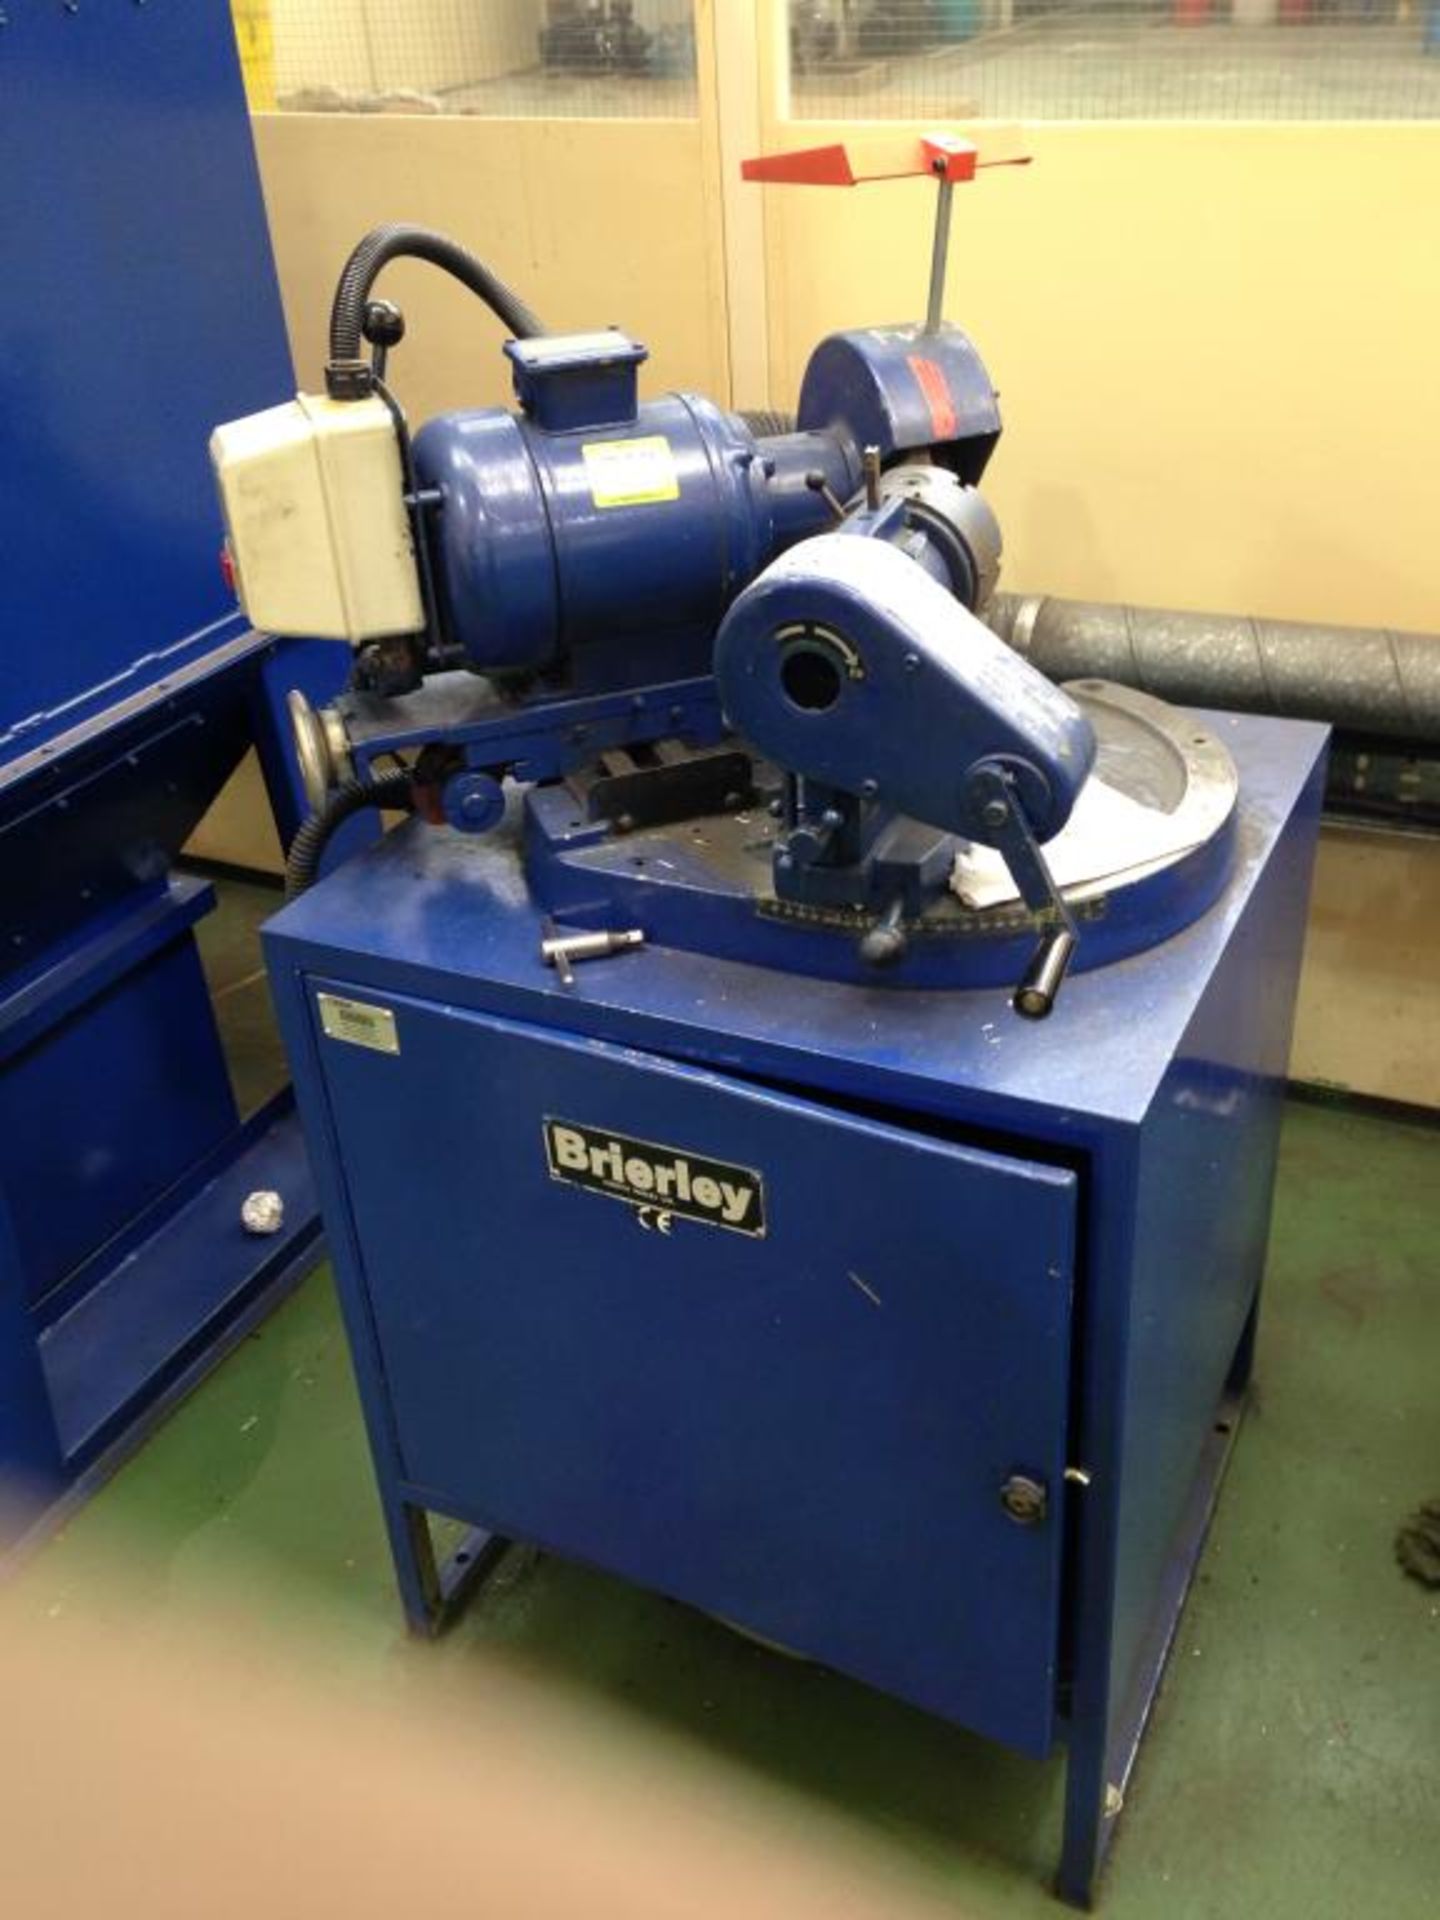 Brierley Drill Sharpener. Asset# 231. HIT# 2082243. Fast Track Cell. Asset Located at Timken